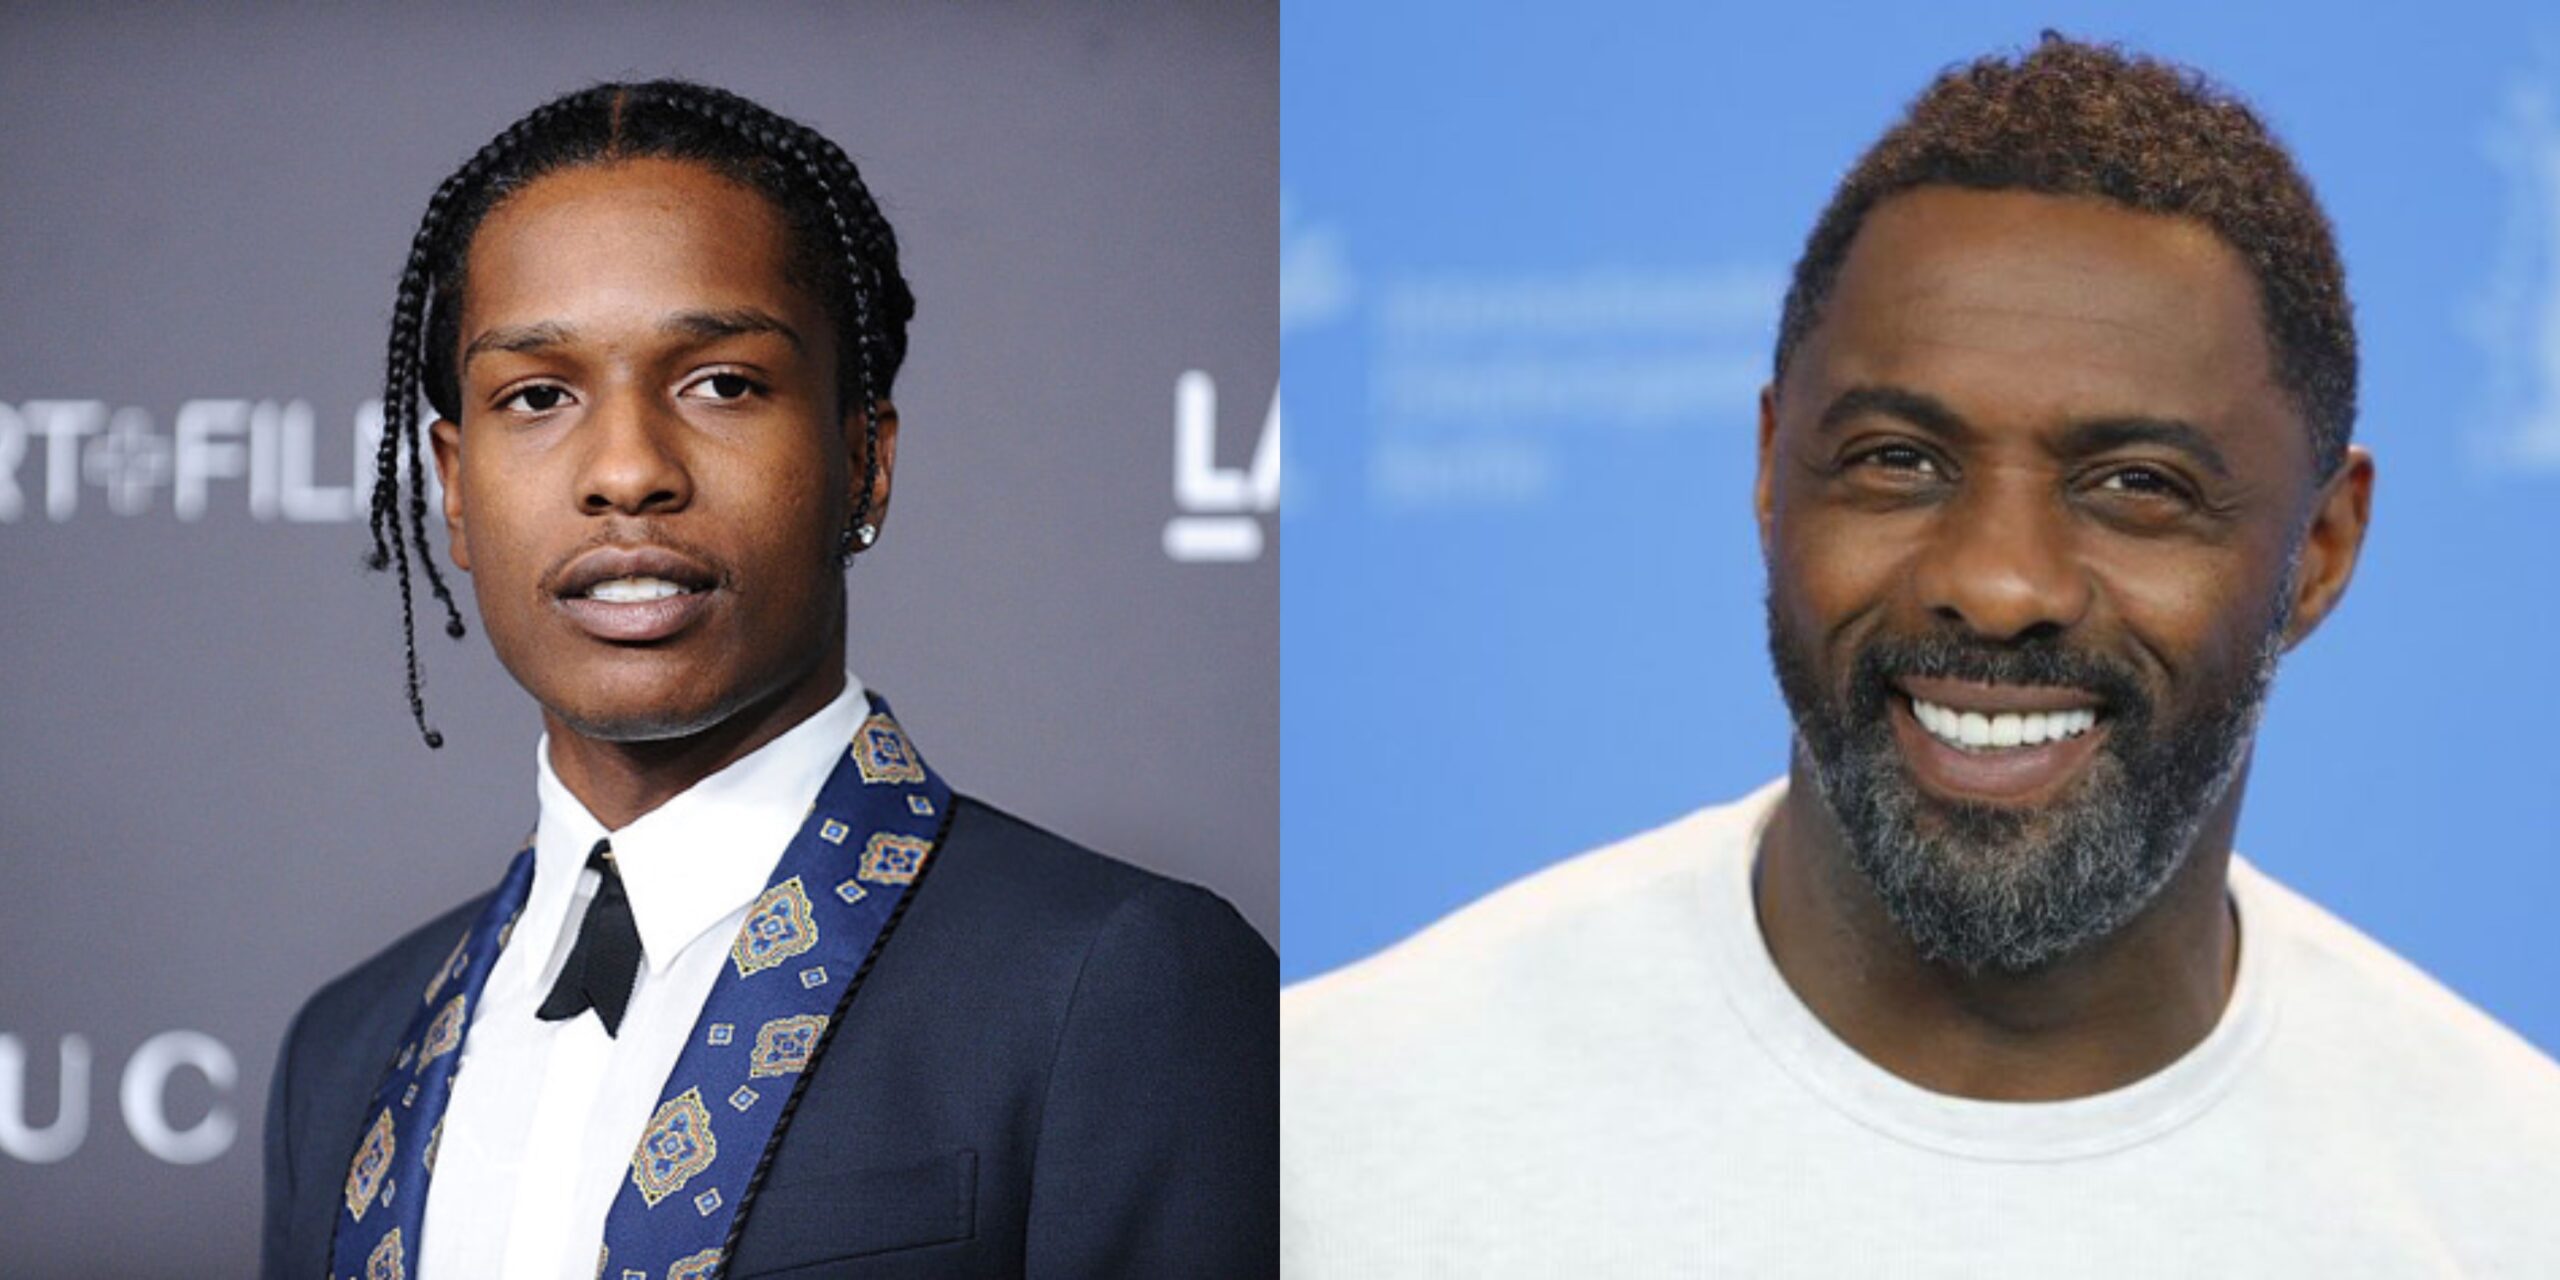 Idris Elba Wants to Work With A$AP Rocky